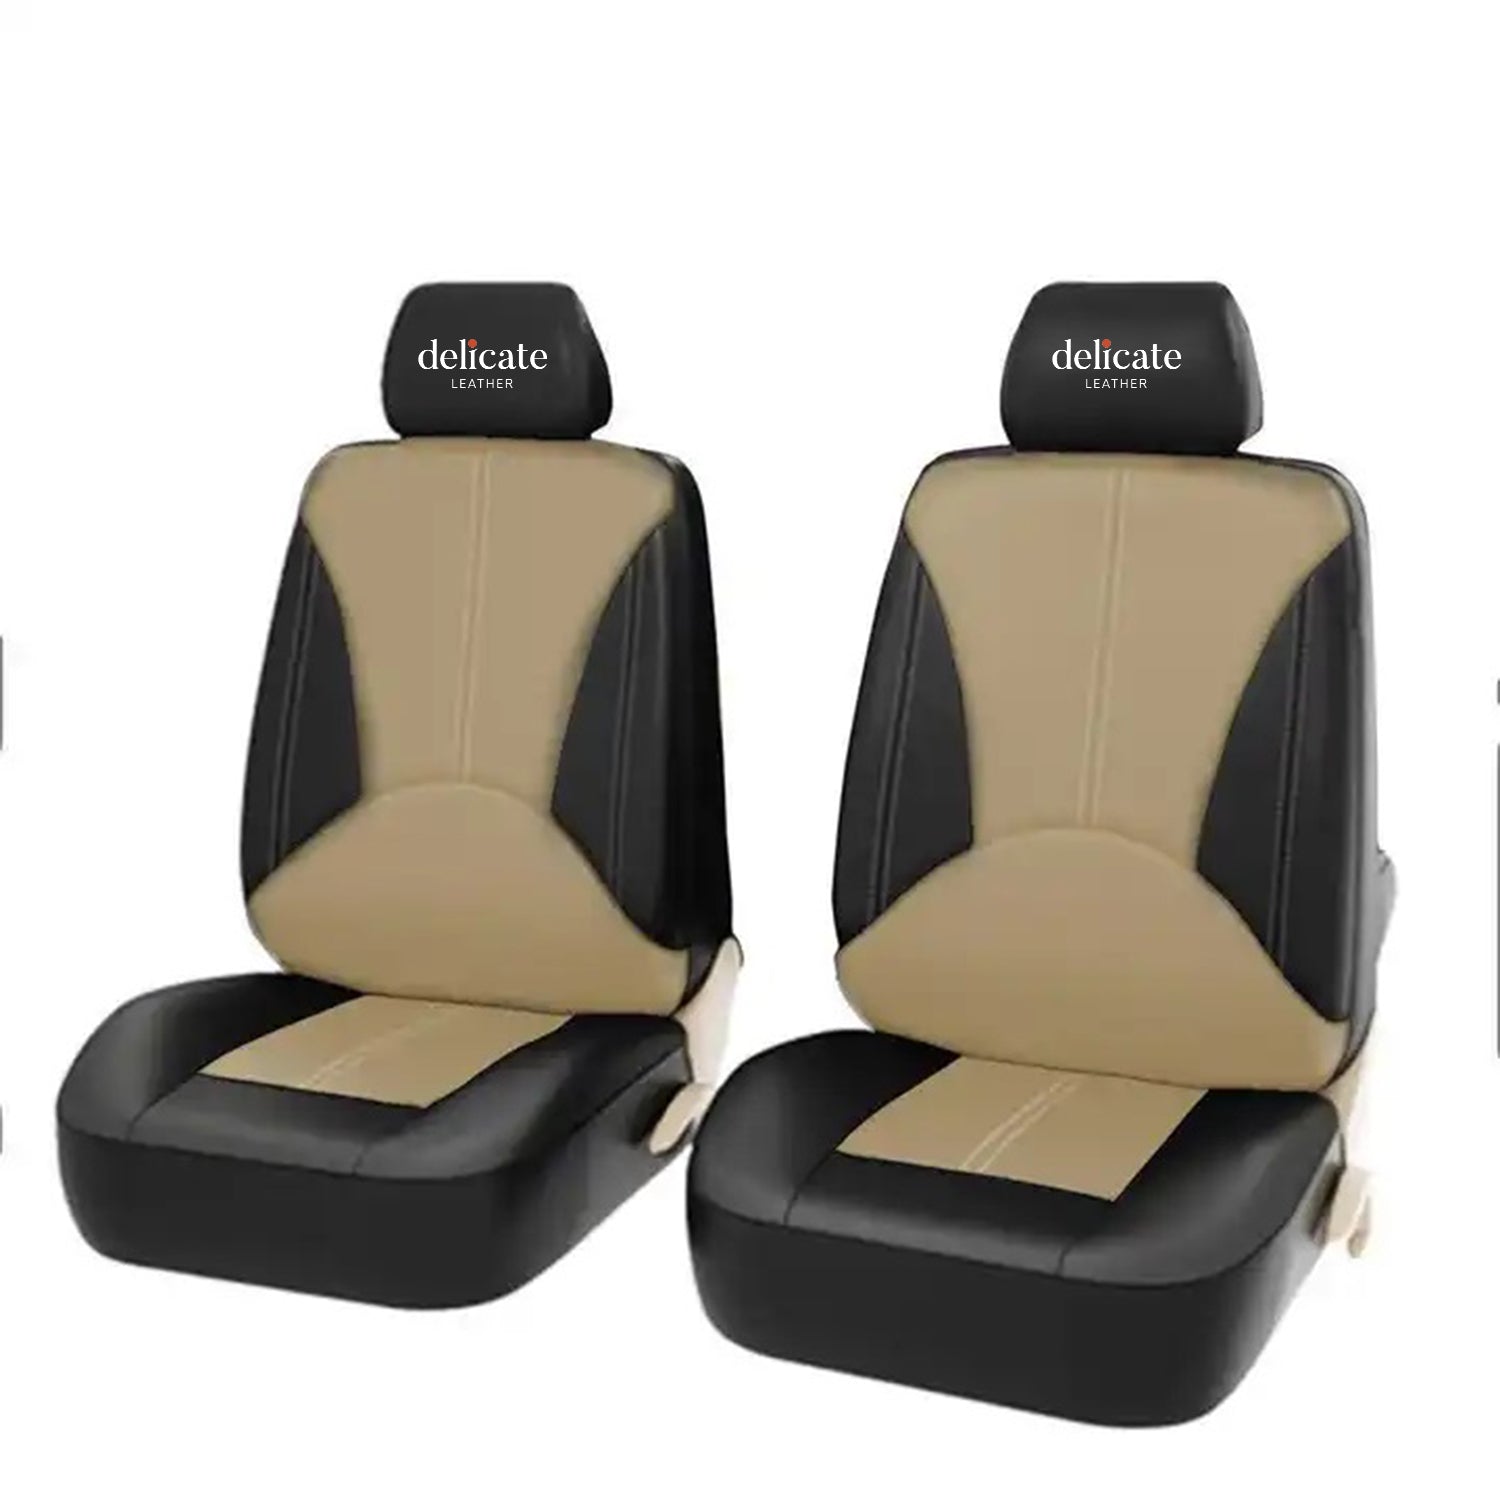 Delicate Leather Car Seat Cover Luxury Leather Car Seat Cover Custom Universal 5pcs Car Seat Cover Set Leather Full Set Universal - Delicate Leather